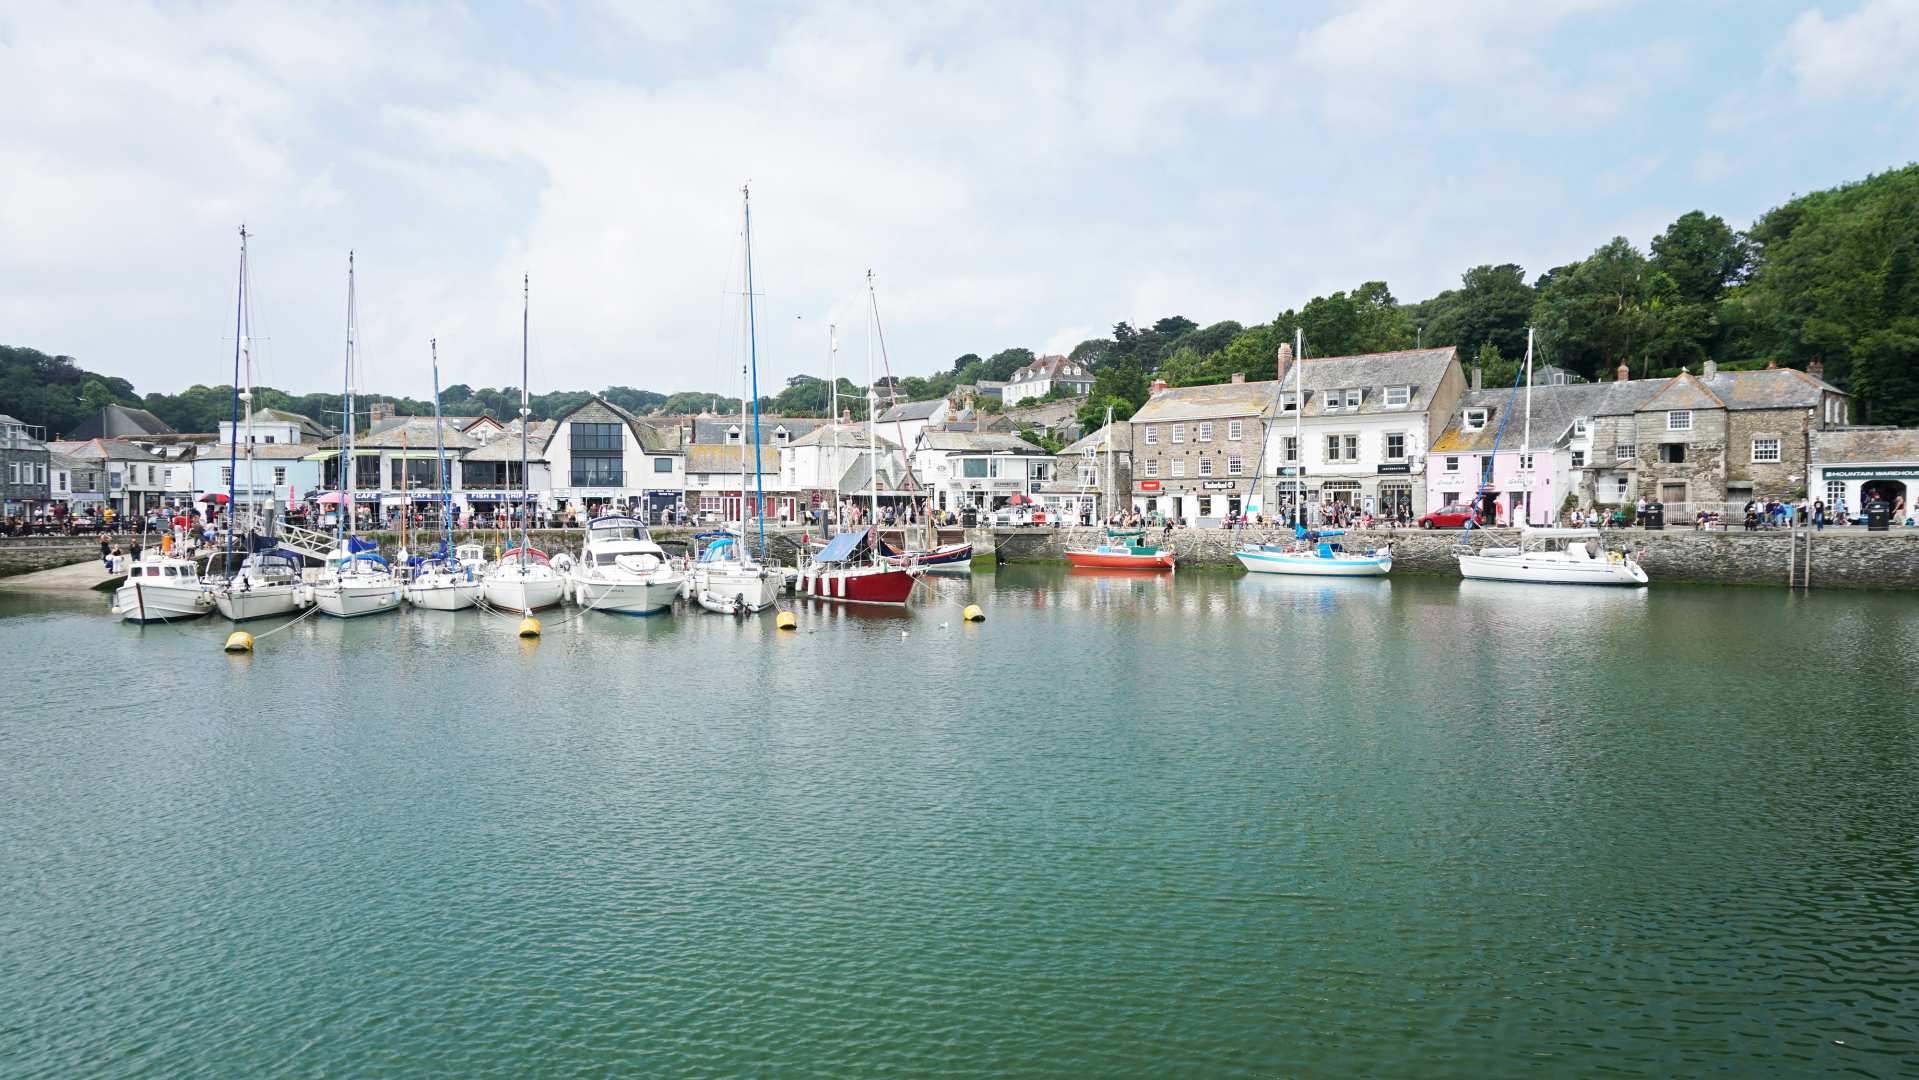 Padstow Harbour 3 - Padstow Harbour 3